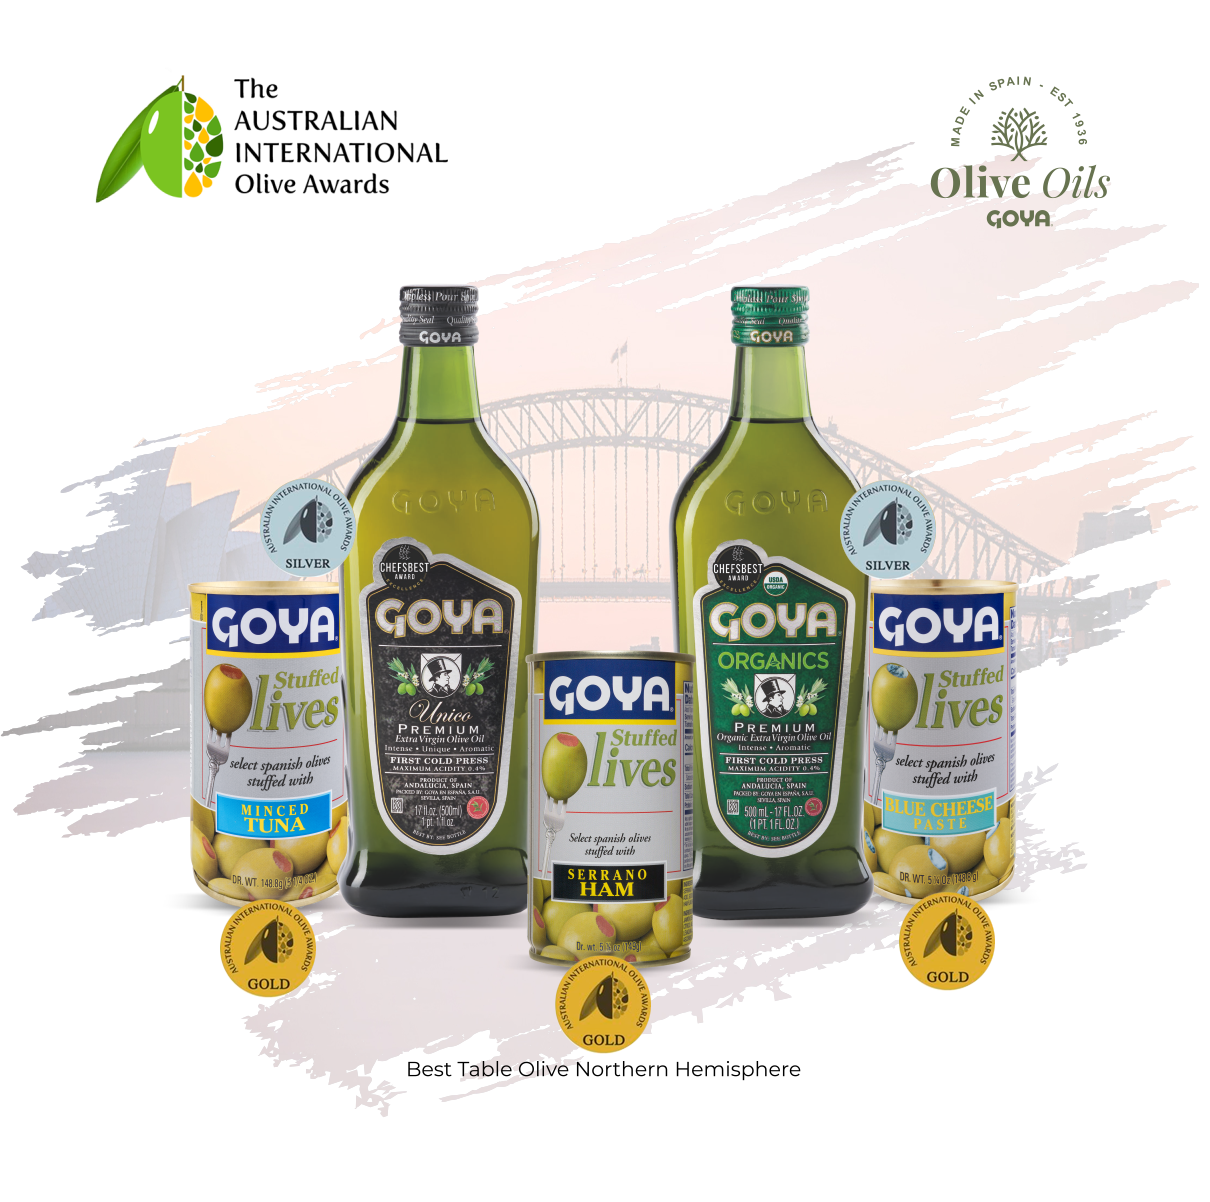 Top presence of Goya olives and olive oils at AIOA awards in Australia ...